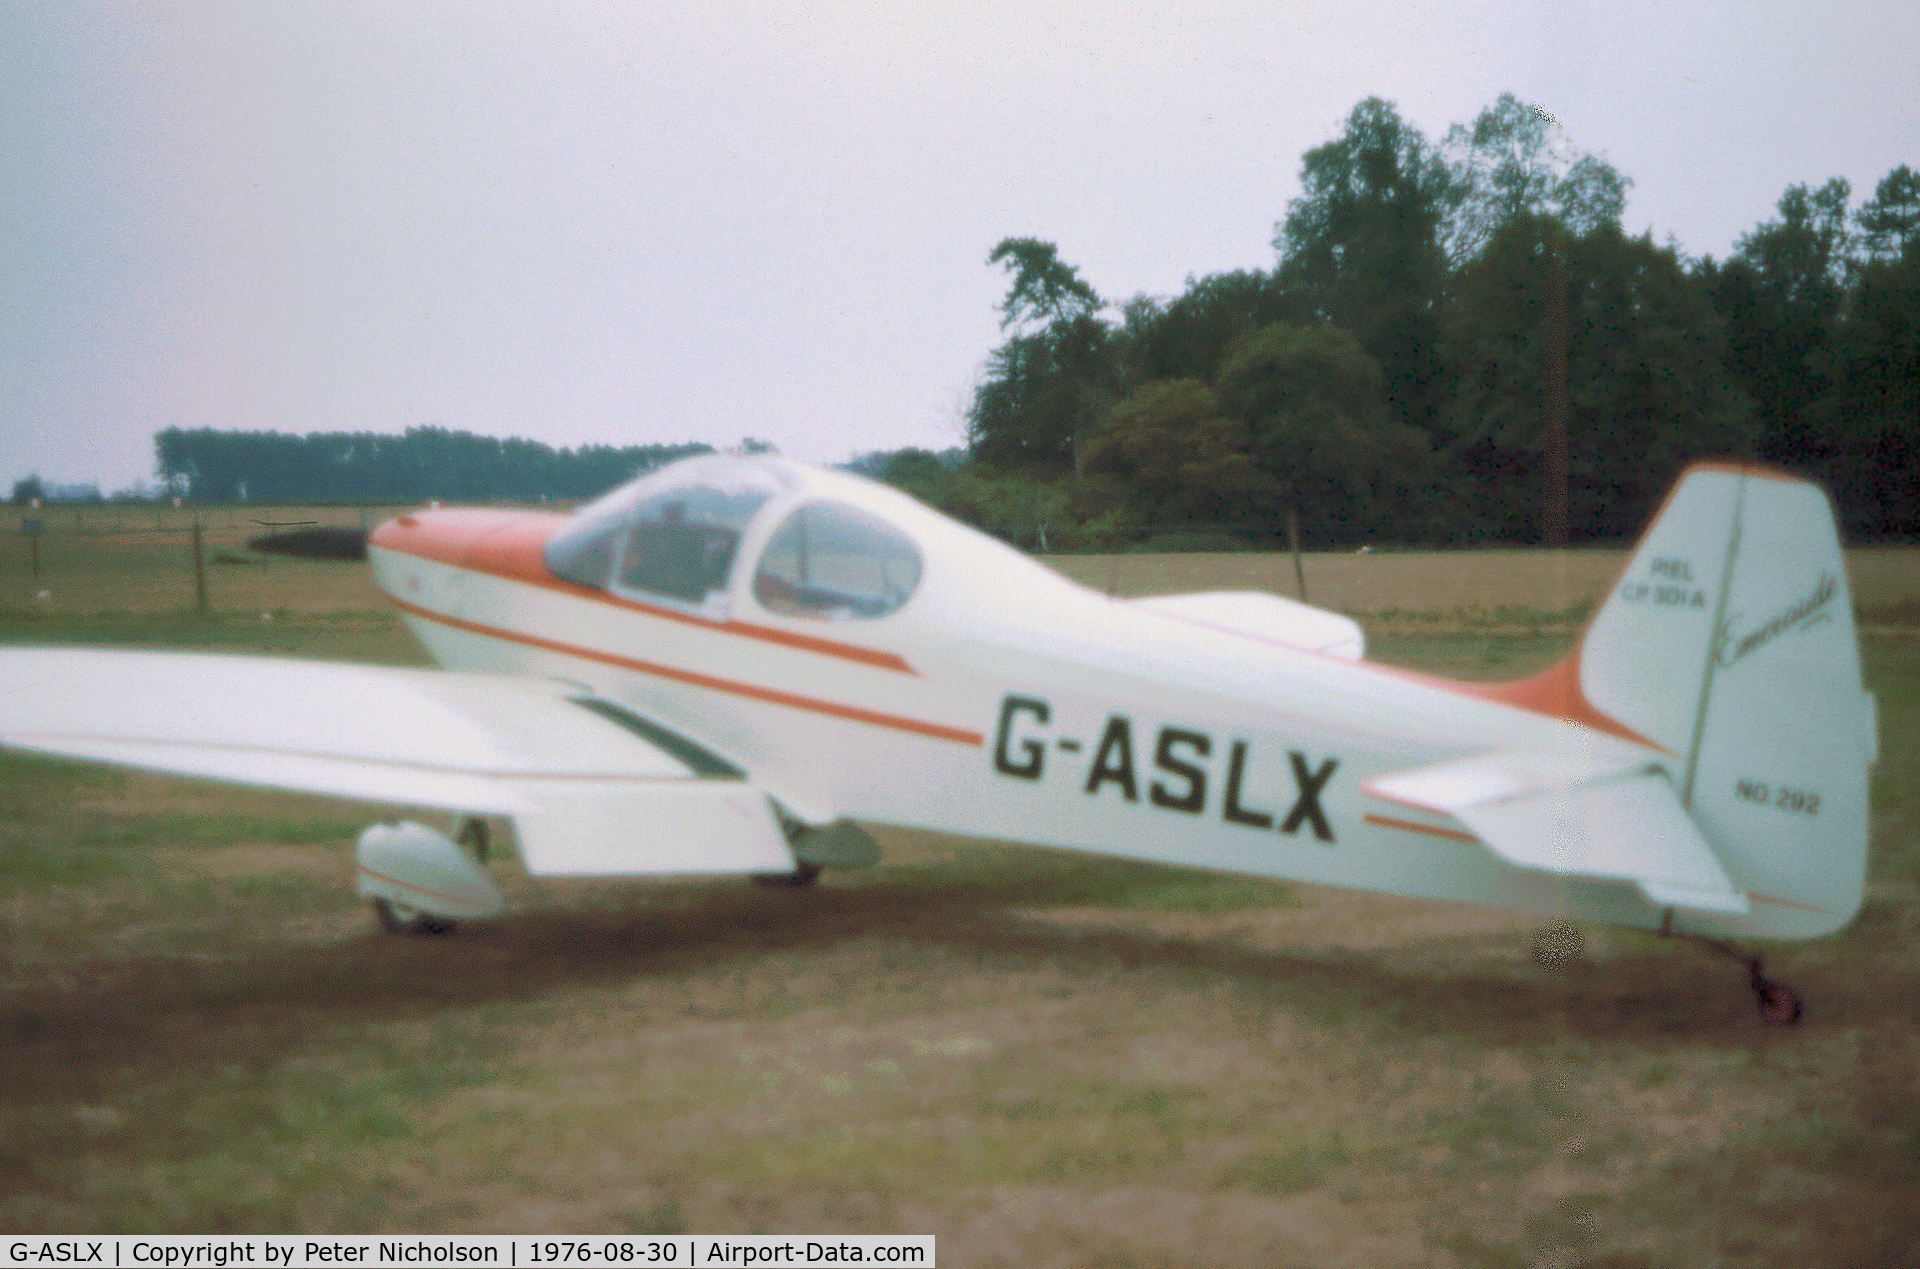 G-ASLX, 1958 Piel CP-301A Emeraude C/N 292, Piel CP.301A Emerude as seen at Old Warden in the Summer of 1976.